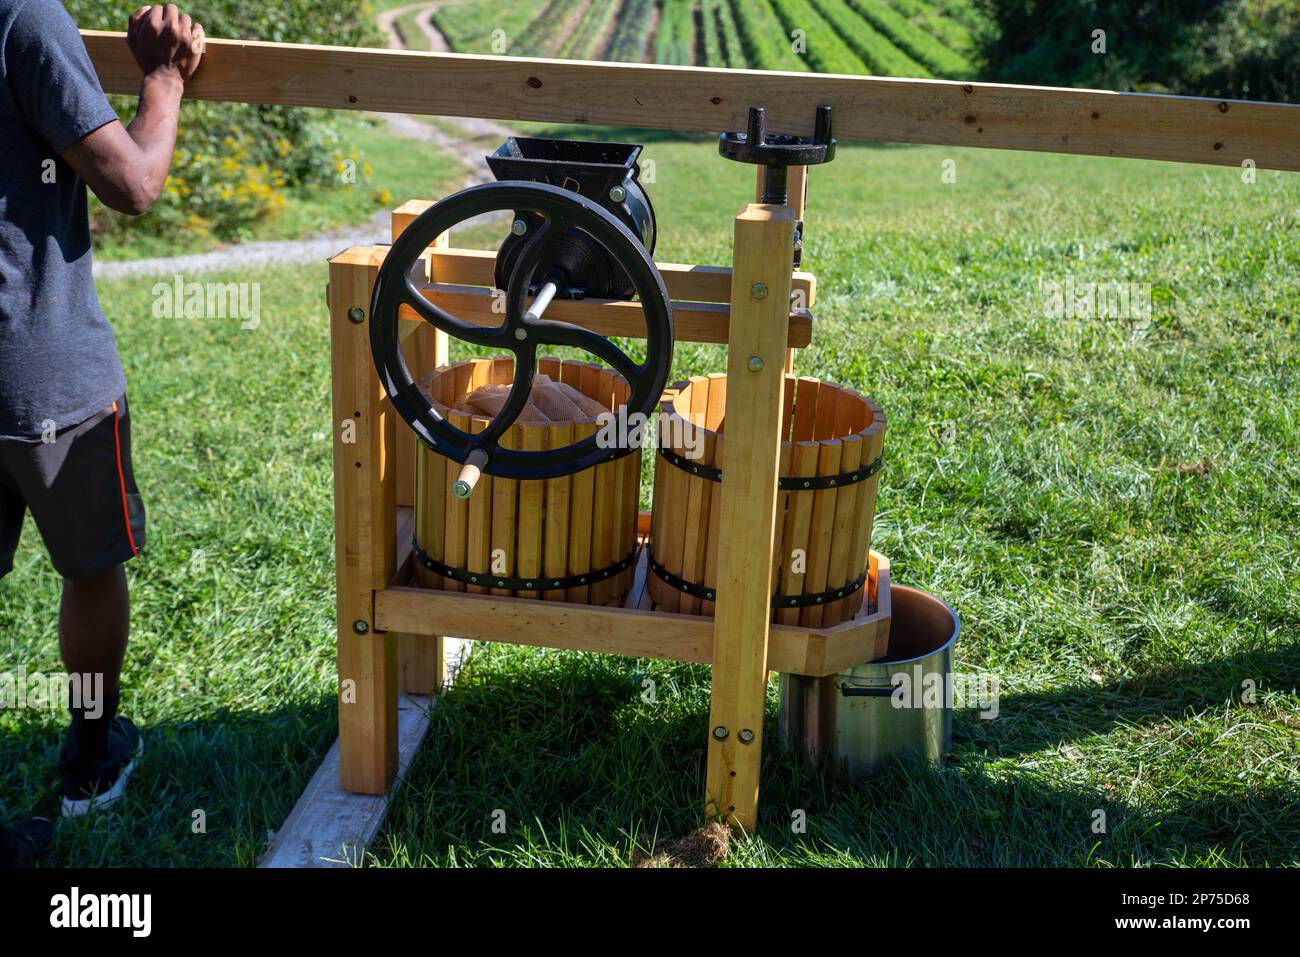 https://c8.alamy.com/comp/2P75D68/young-man-turns-crank-on-wooden-apple-cider-press-with-sunny-green-grassoutdoor-farm-nature-background-2P75D68.jpg